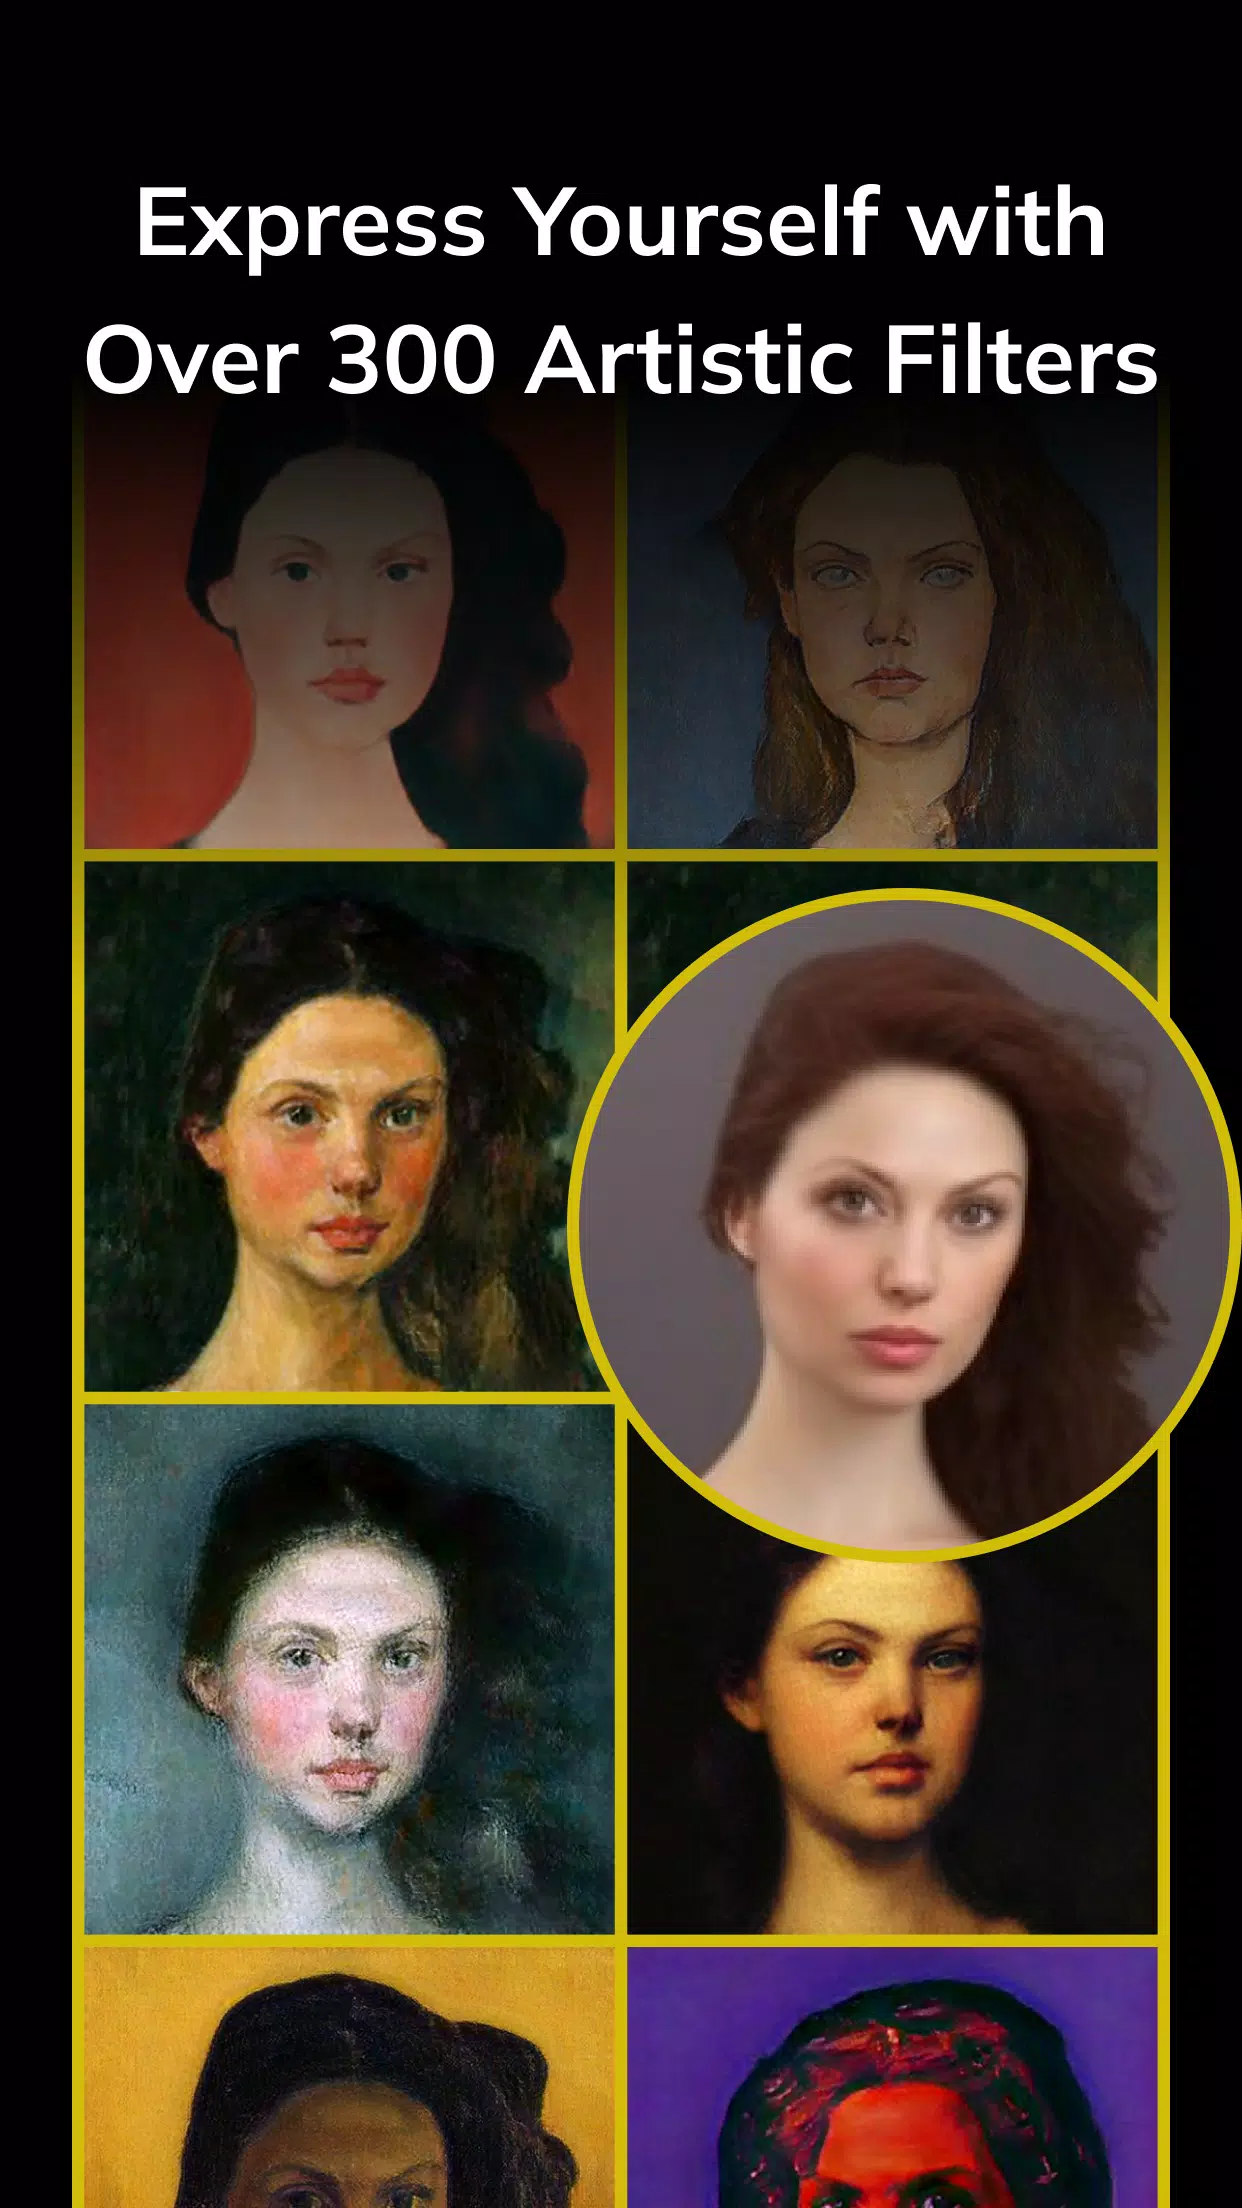 AI Avatar maker, AI portrait for Android - Download the APK from Uptodown